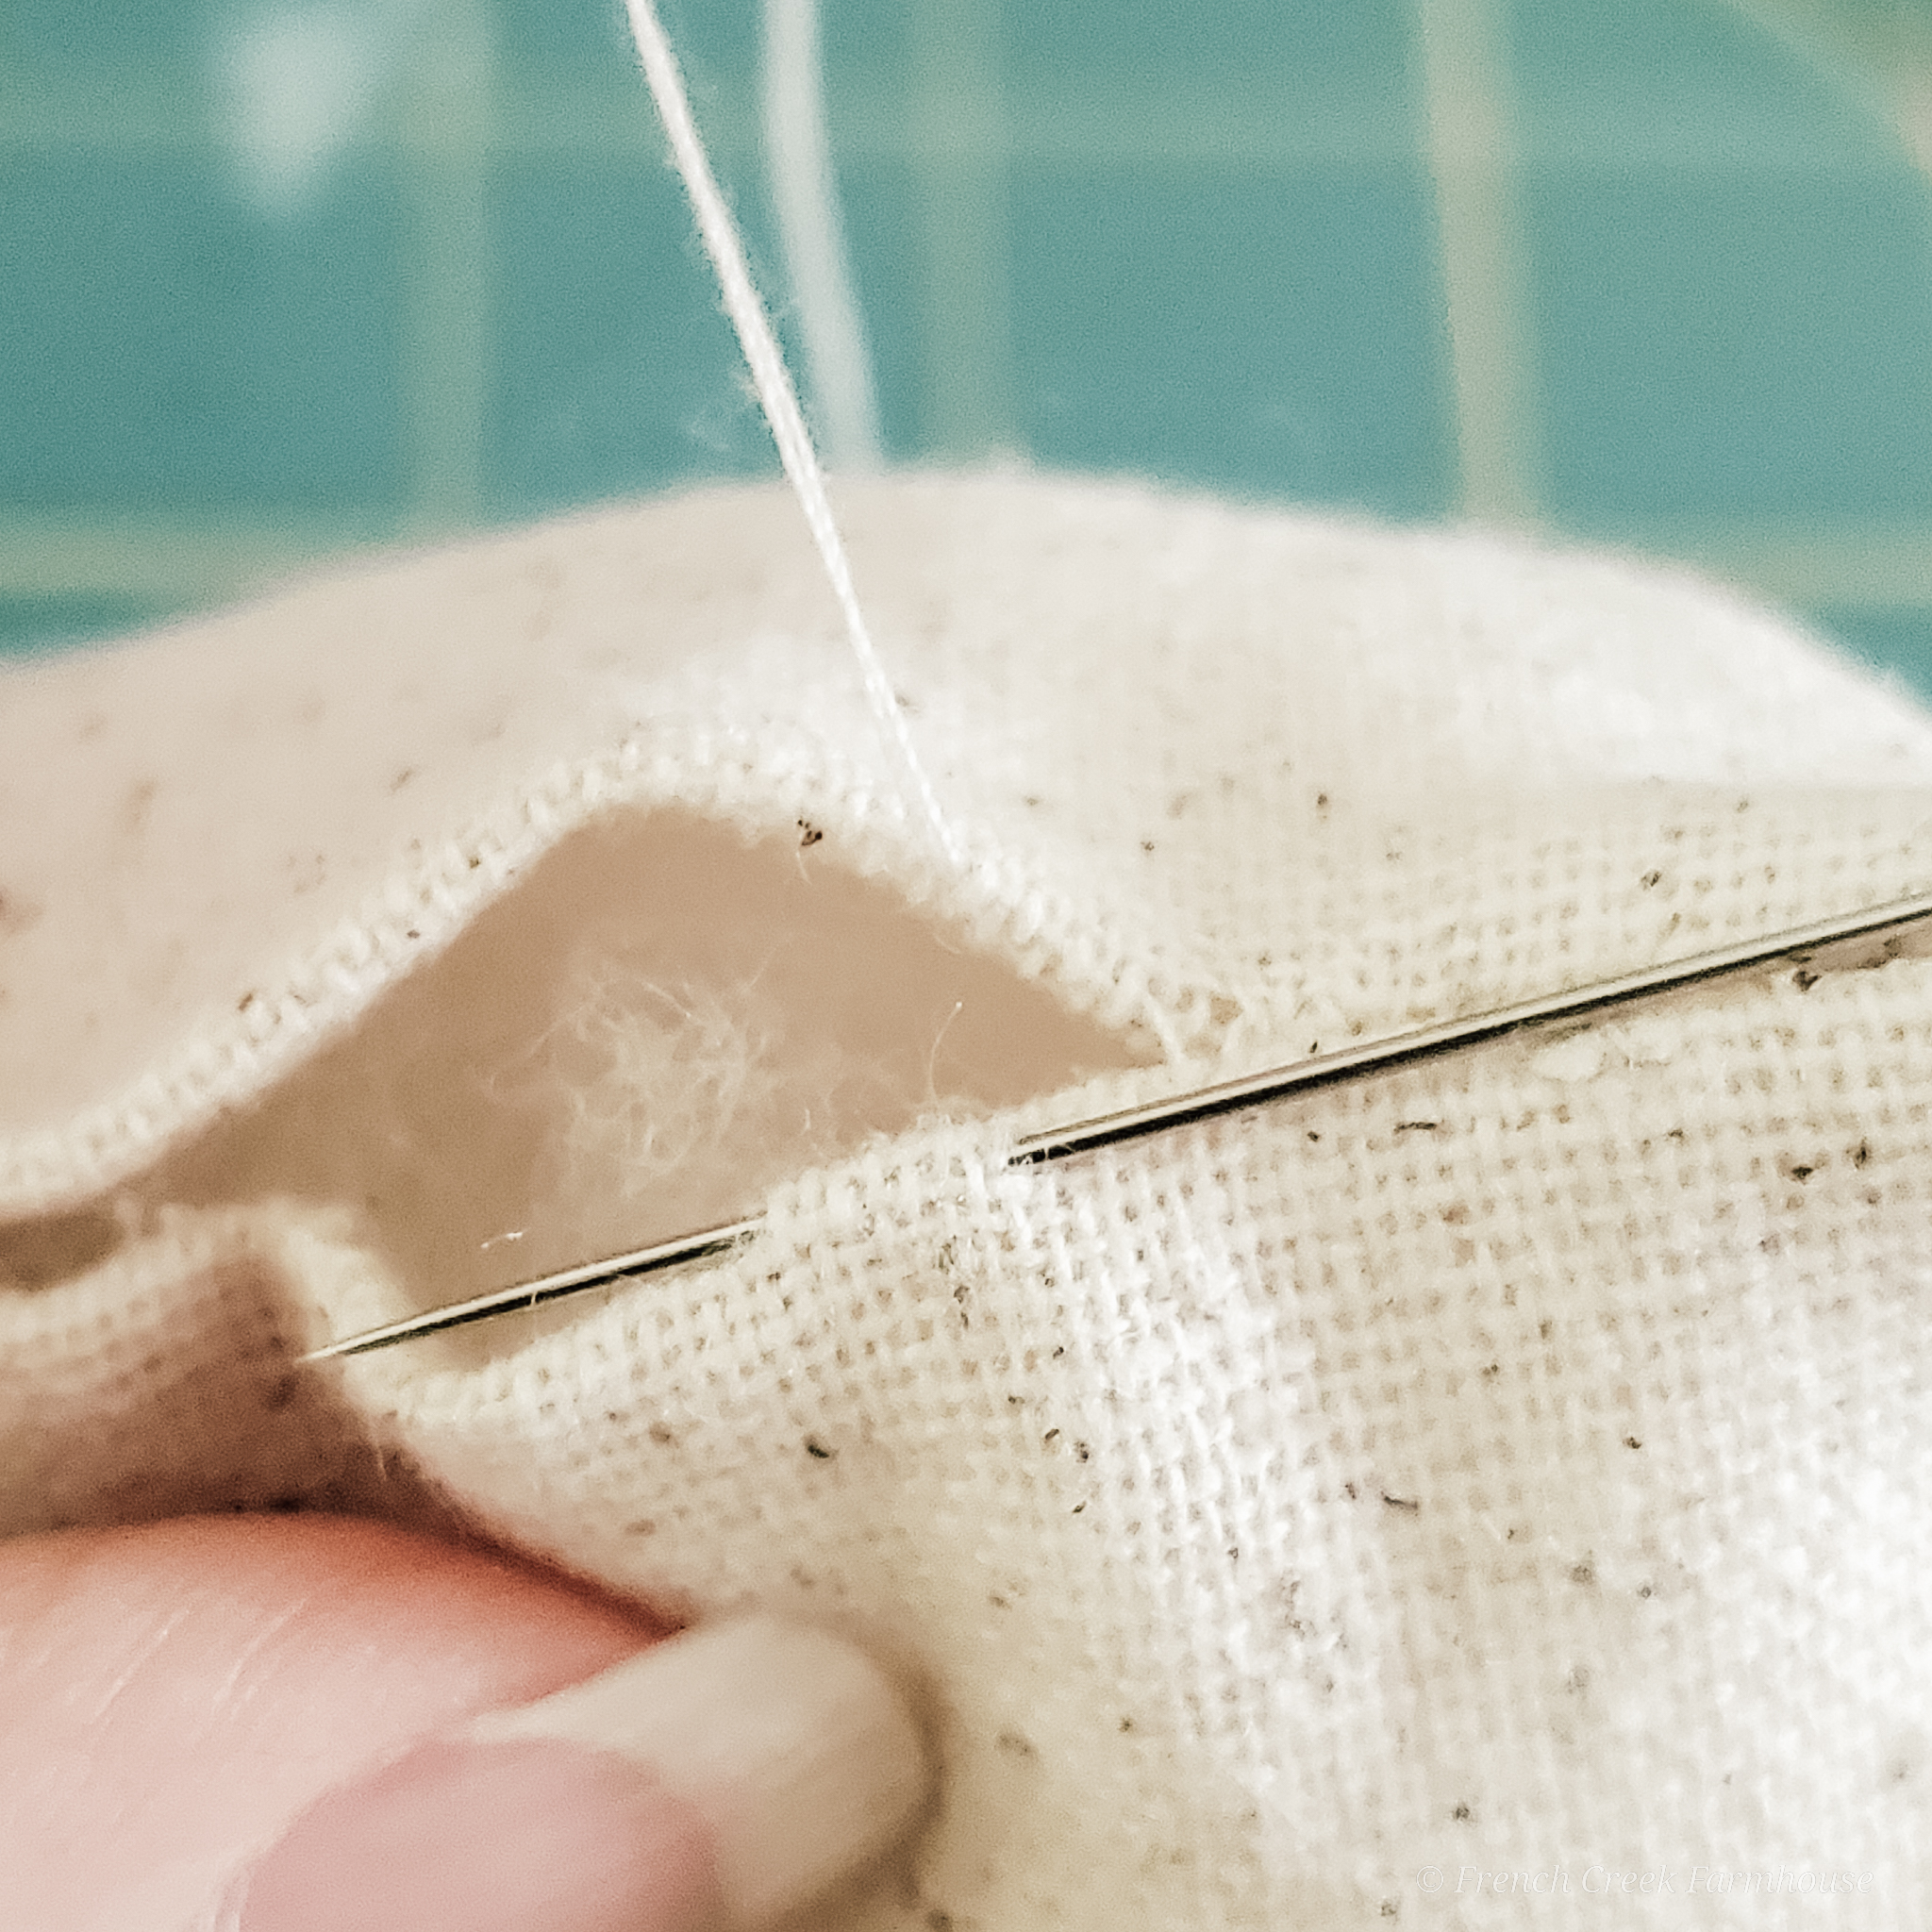 The ladder stitch is a simple hand-sewing technique to close up a seam invisibly